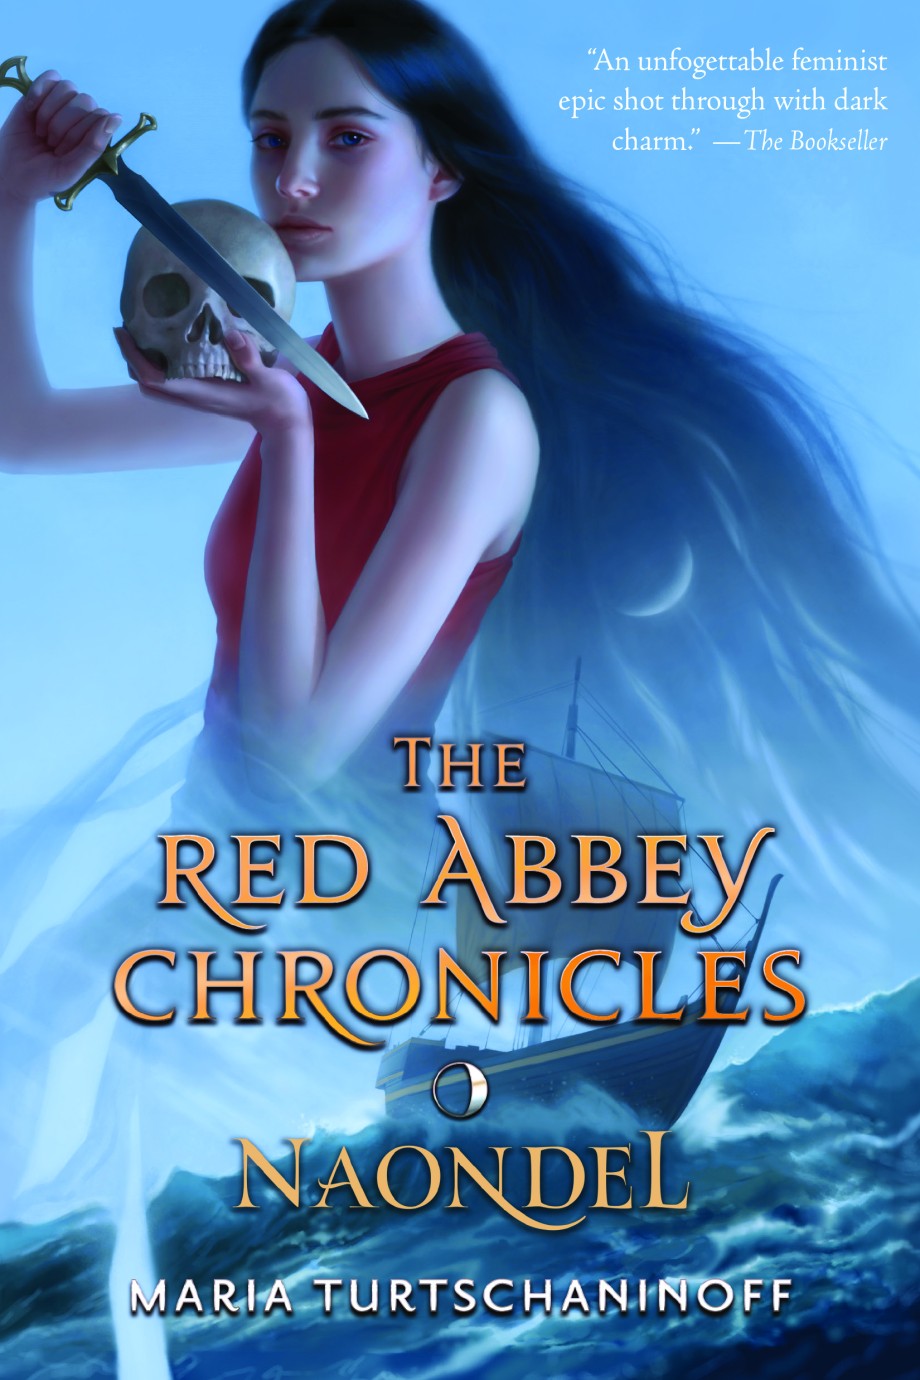 Naondel The Red Abbey Chronicles Book 2